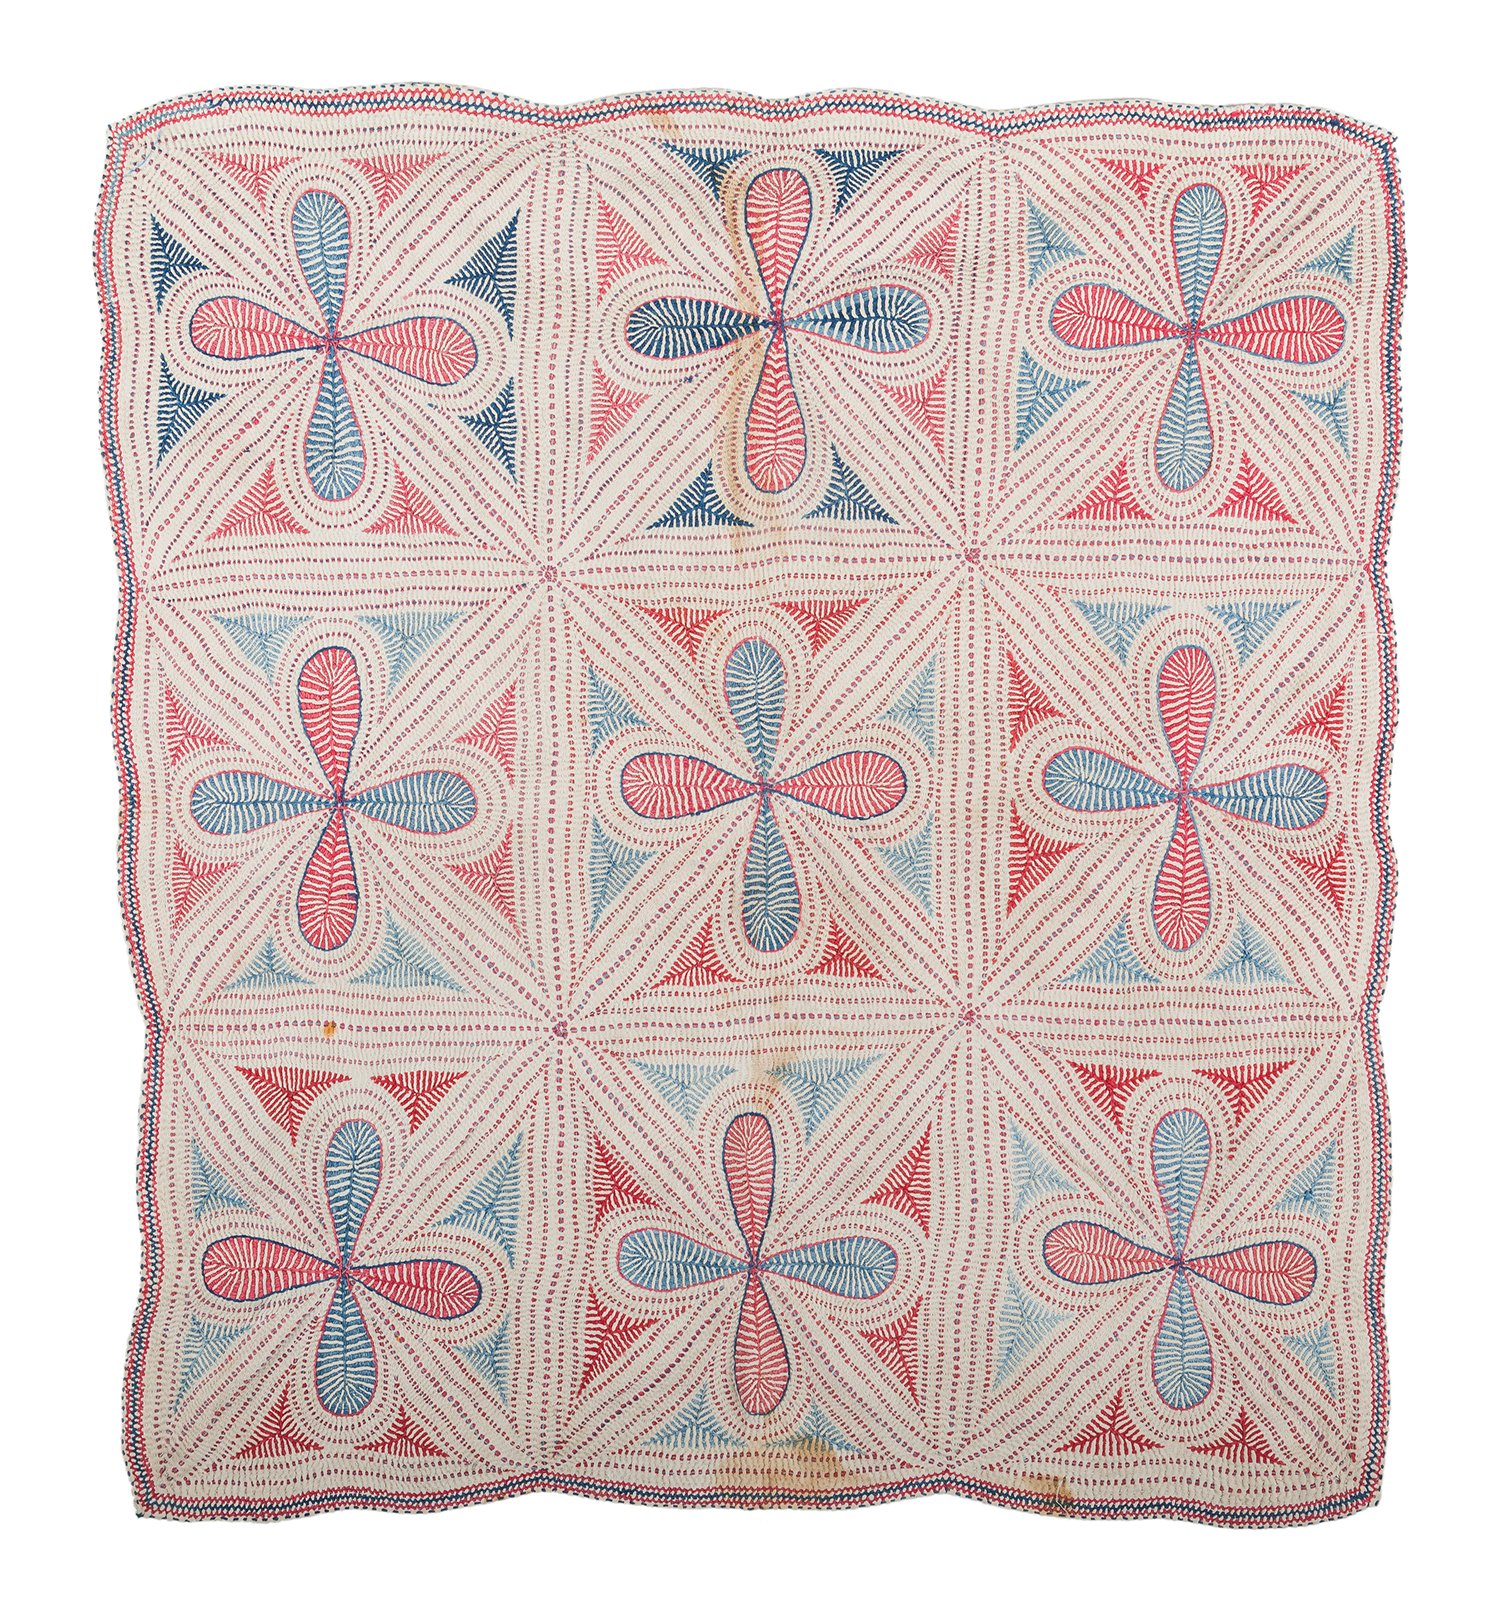 A patchwork dotted Kantha showing four-petalled flowers arranged in a grid of nine cells.